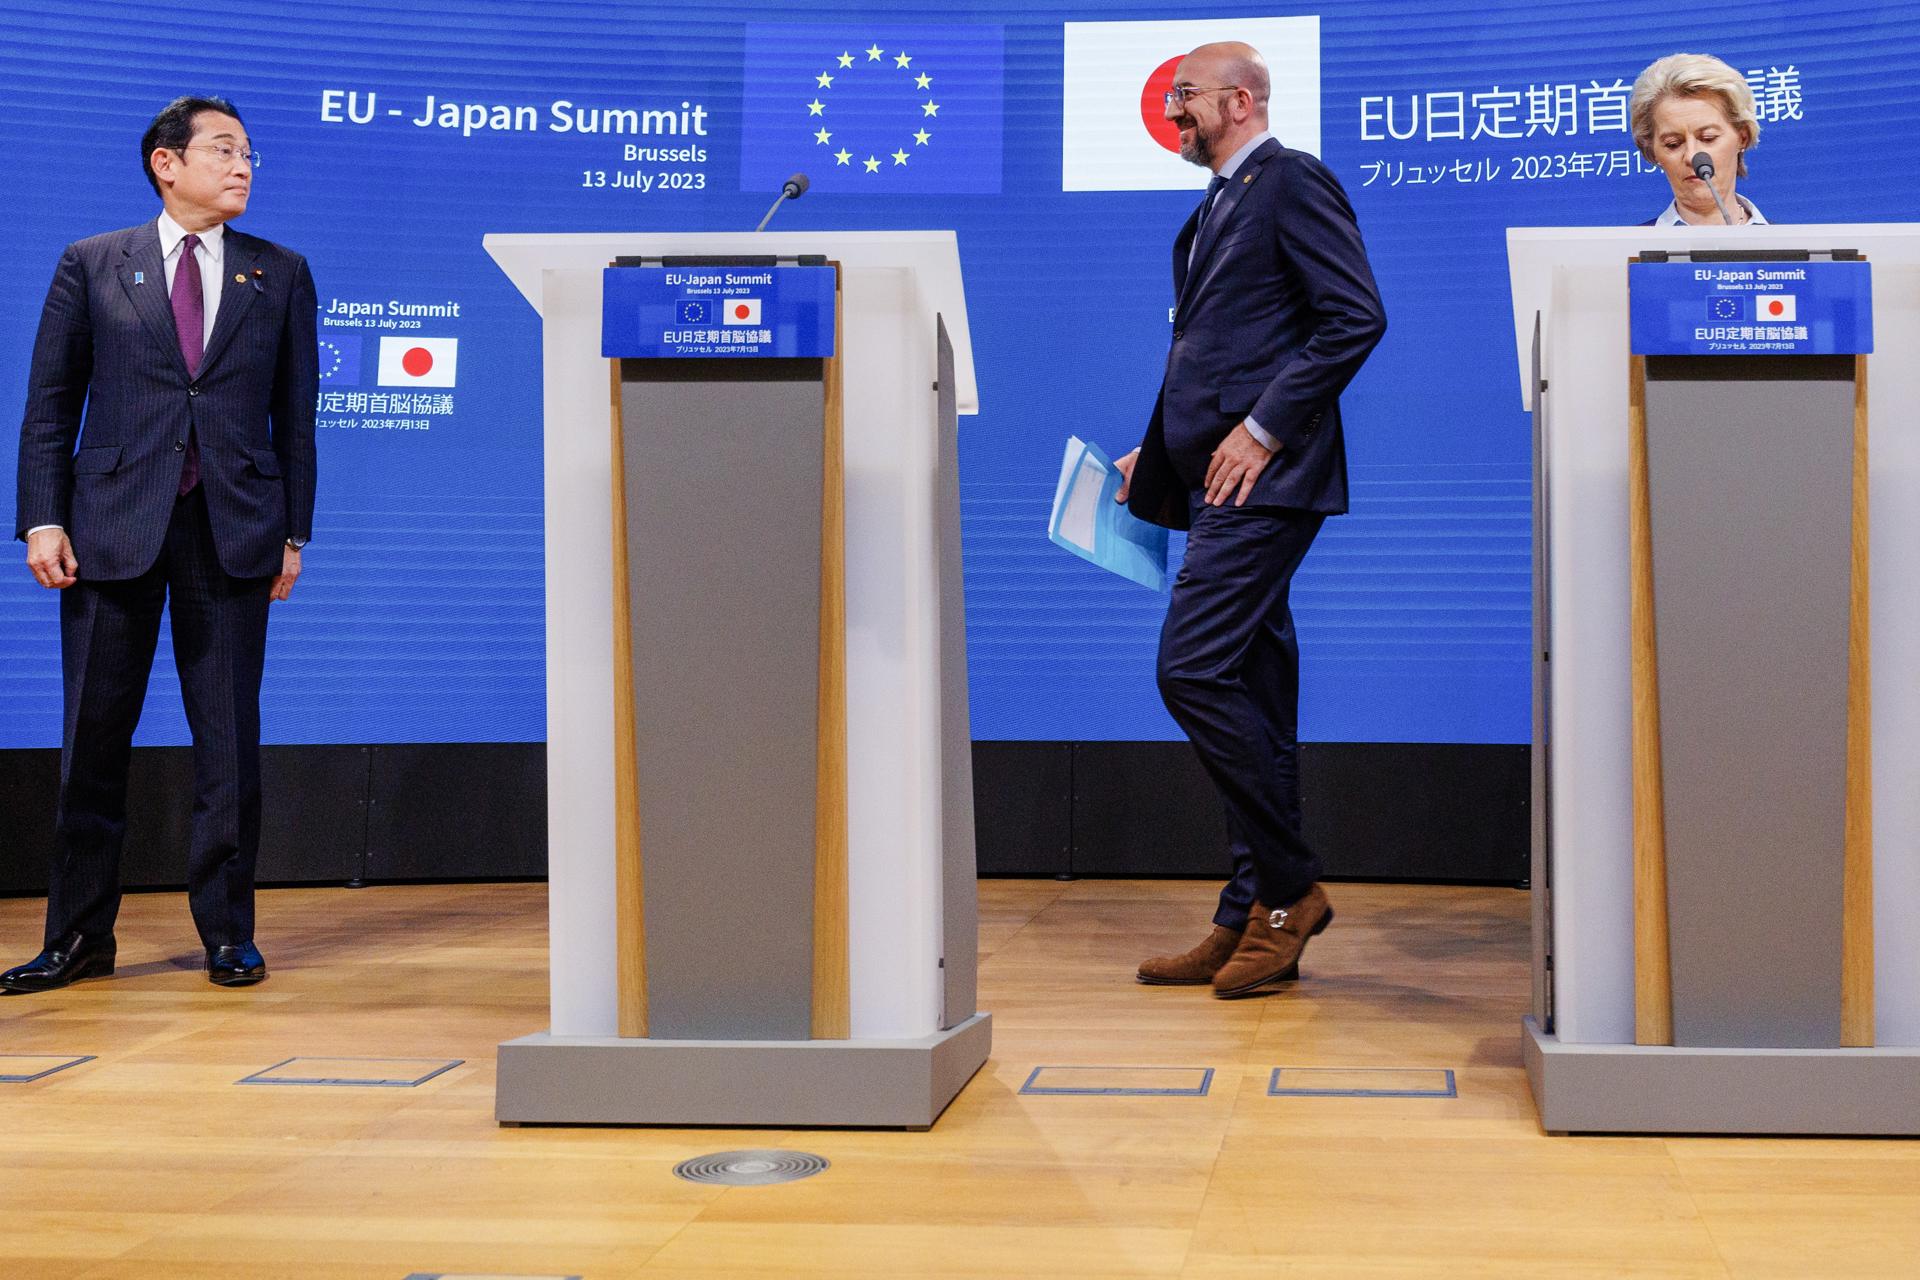 Brussels (Belgium), 13/07/2023.- (L-R) Japan's Prime Minister Fumio Kishida, European Council President Charles Michel and European Commission President Ursula von der Leyen arrive at a press conference after the 29th EU-Japan summit in Brussels, Belgium, 13 July 2023. Japan is EU's closest partner in the Indo-Pacific region. The summit highlights this strong relationship as leaders take stock of progress on several partnerships and lay the ground for deeper cooperation. (Bélgica, Japón, Bruselas) EFE/EPA/OLIVIER MATTHYS
